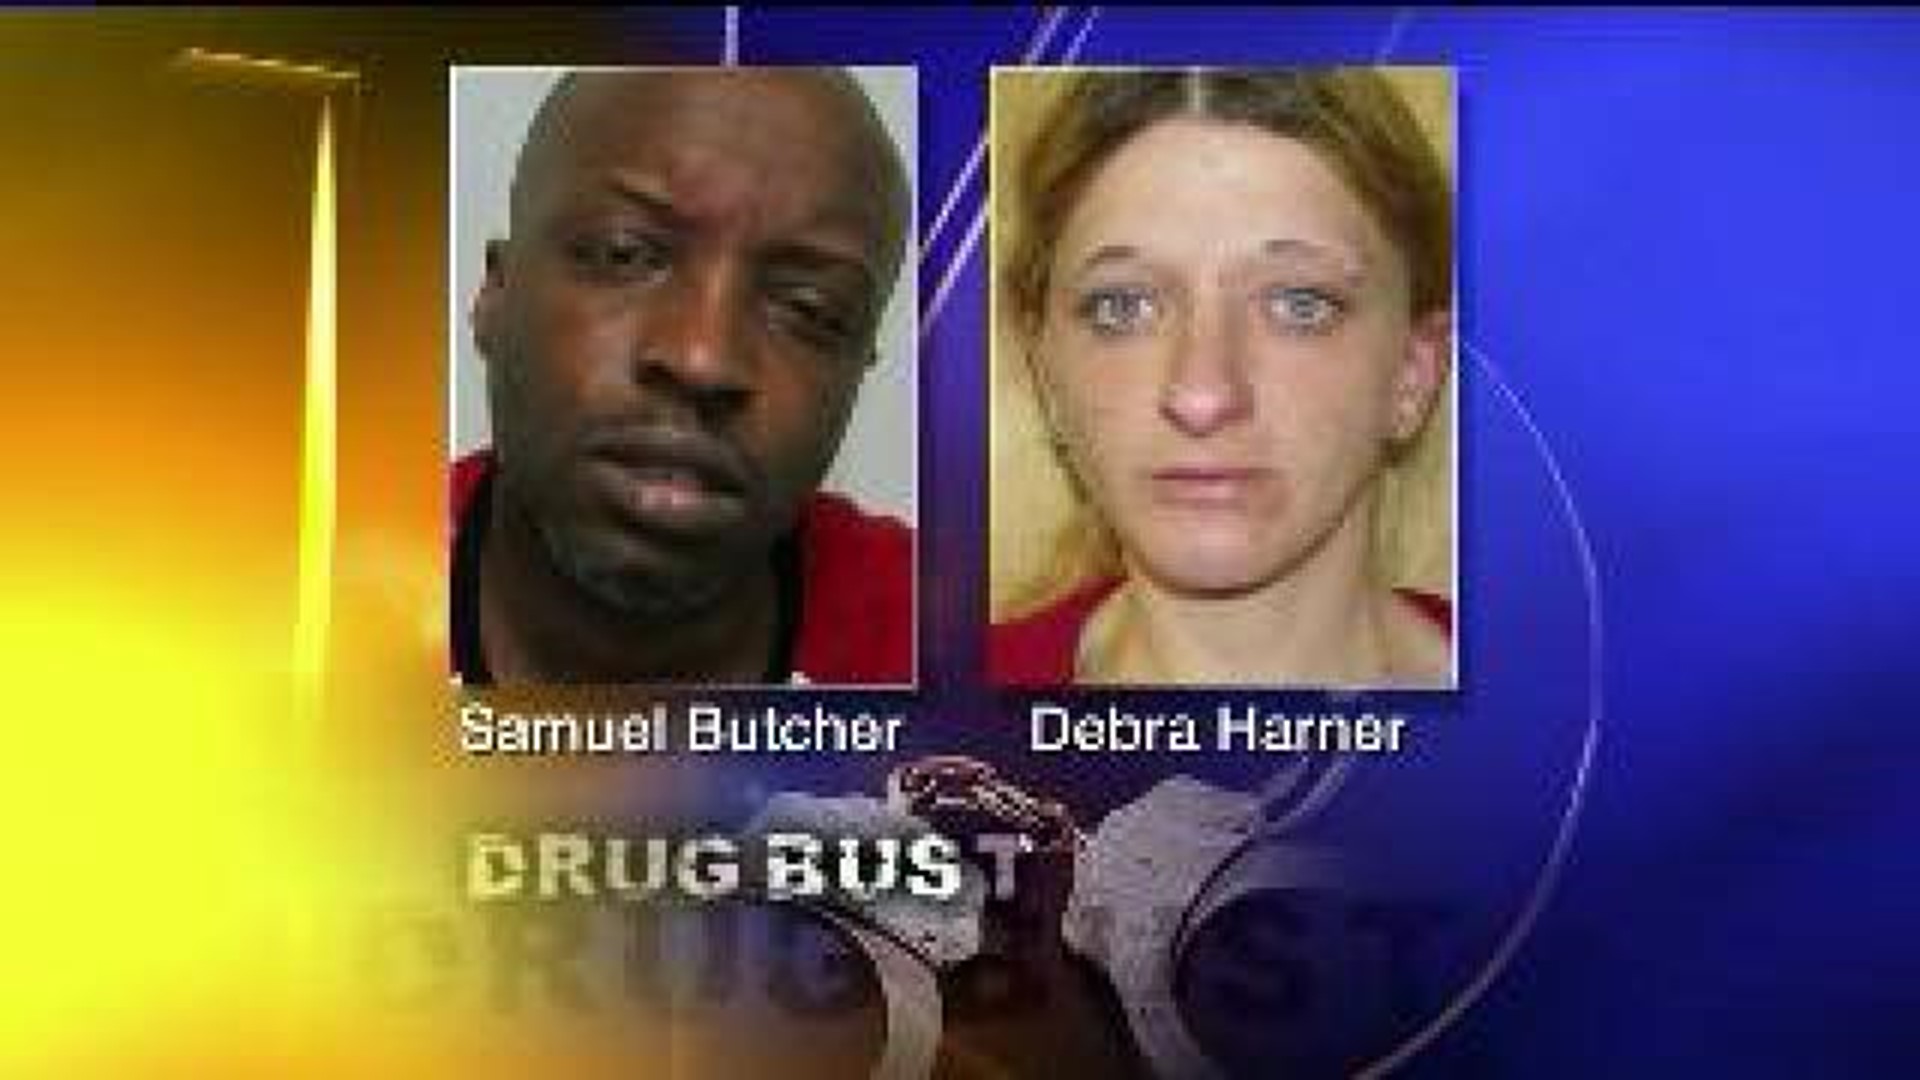 Police Two Arrested for Dealing Drugs with Little Girl Living in Home wnep pic